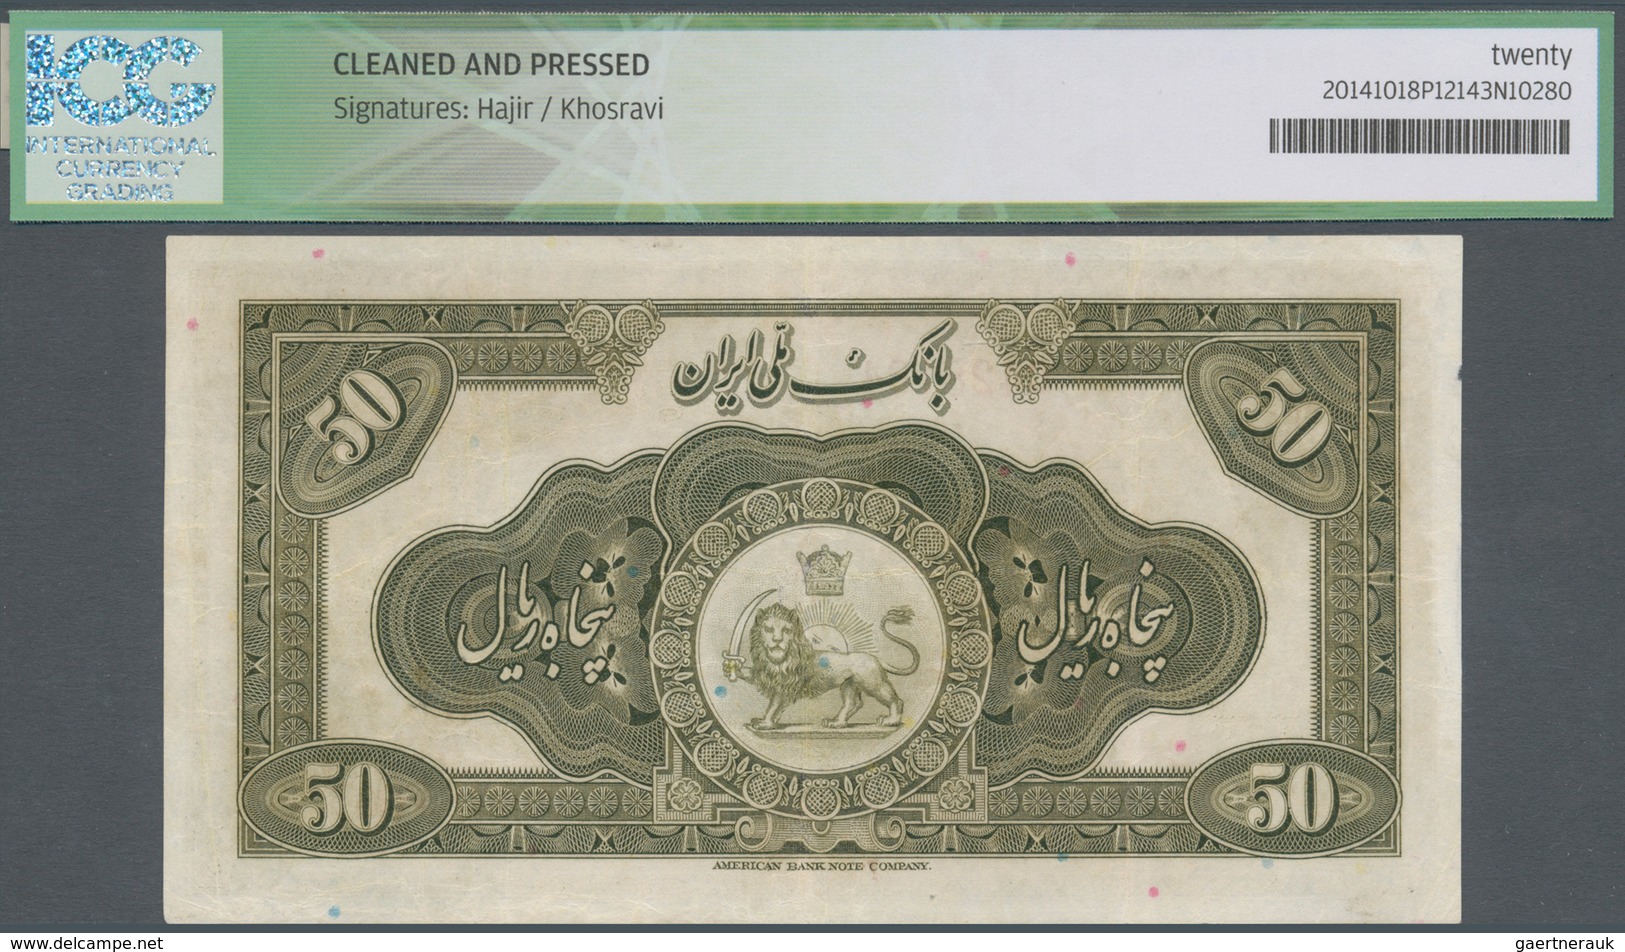 Iran: 50 Rials ND(1934) P. 27, S/N #C428164, Printed By "ABNC", Crisp Paper With Bright Colors, Ligh - Iran